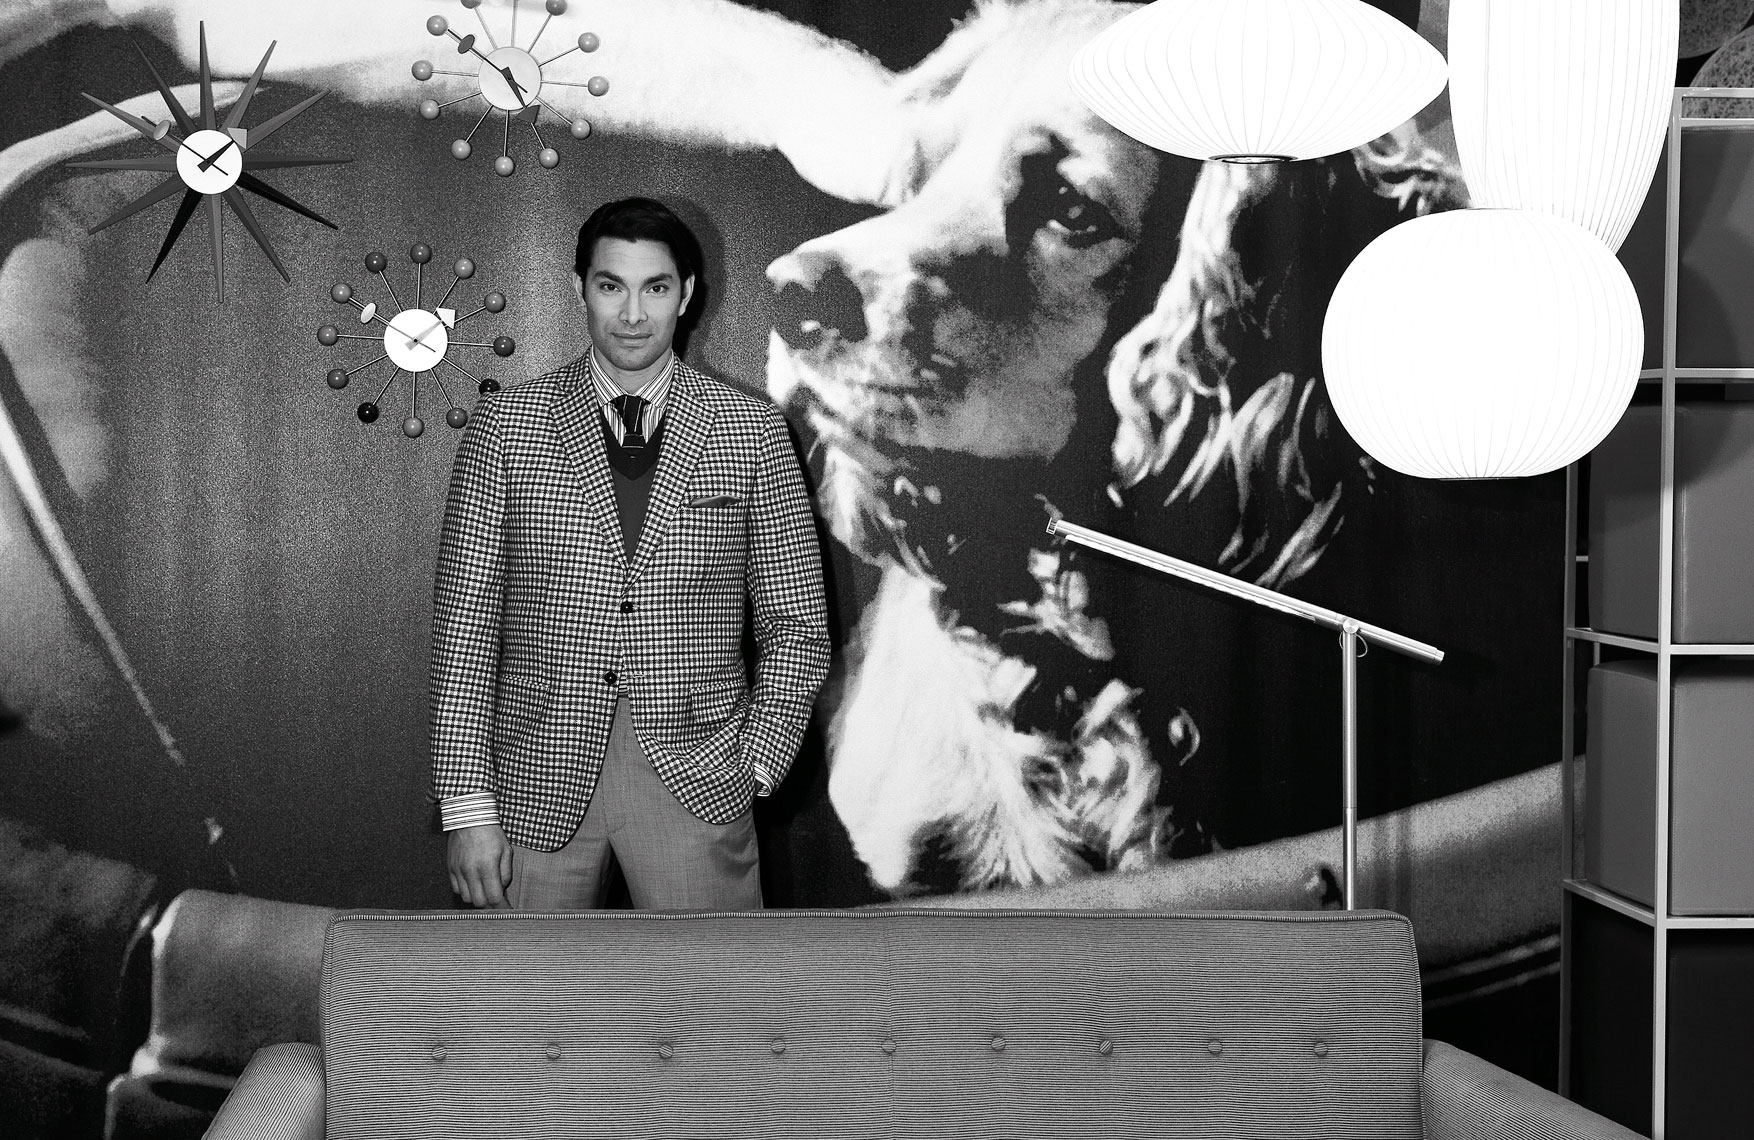 Suited man with eames furniture and background black and white